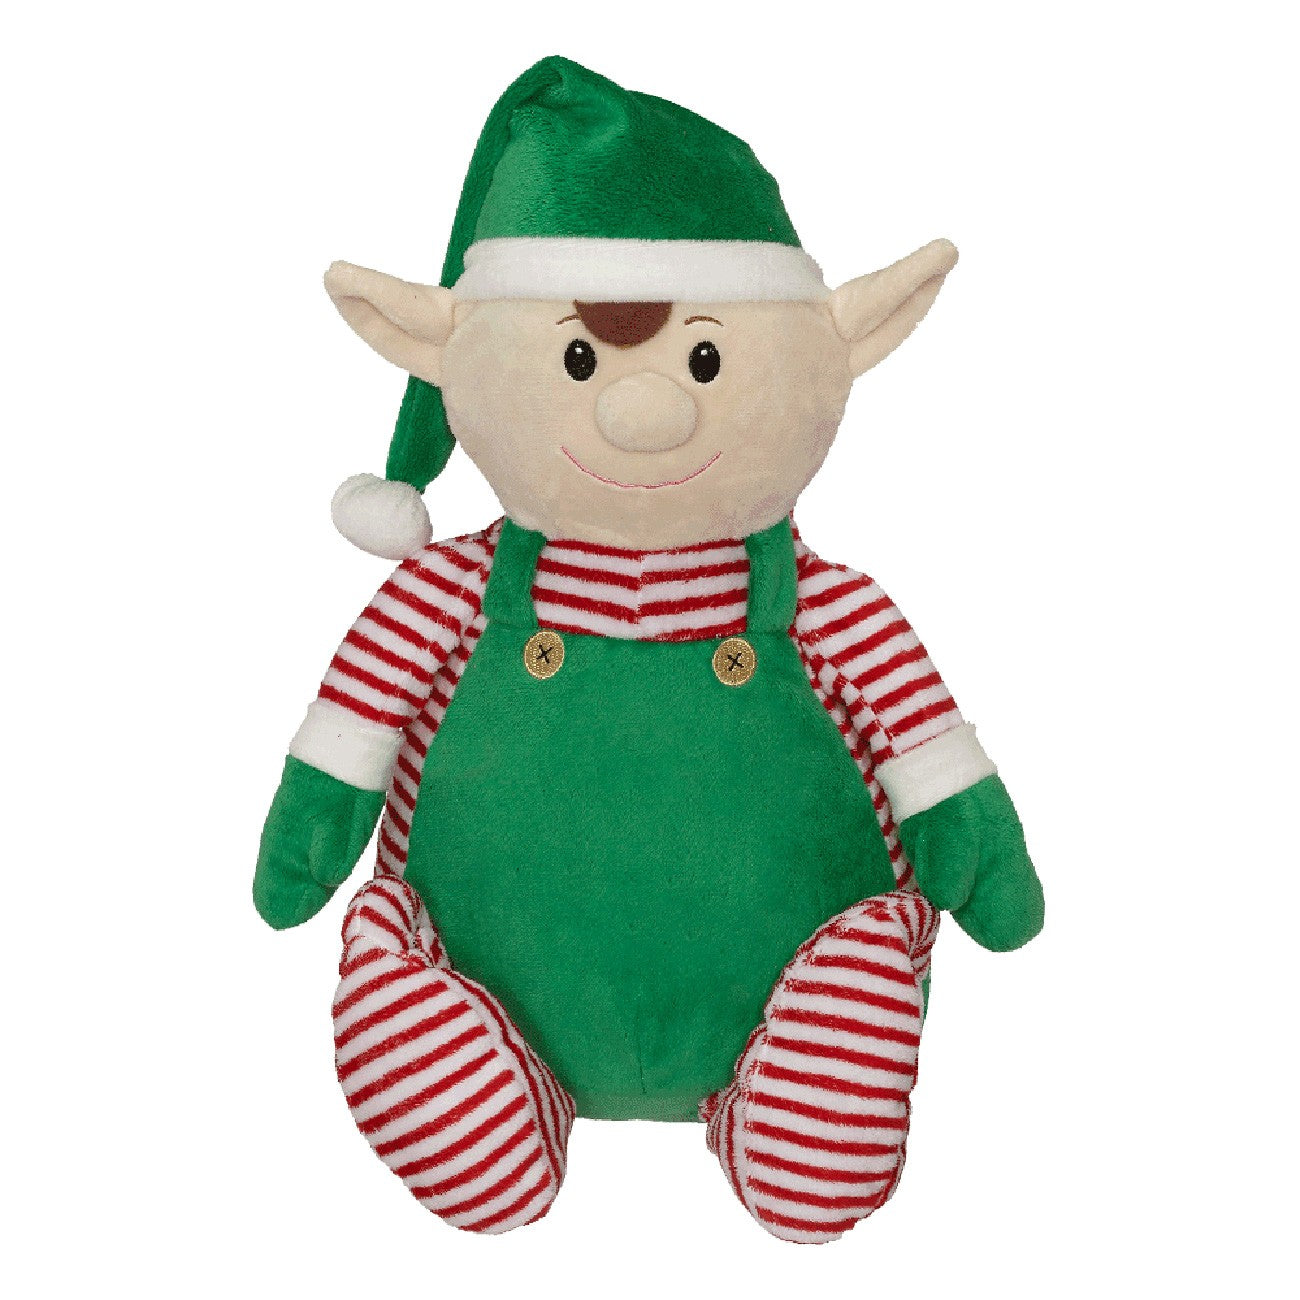 Elf Buddy - Ready for Personalization Embroidery or HTV